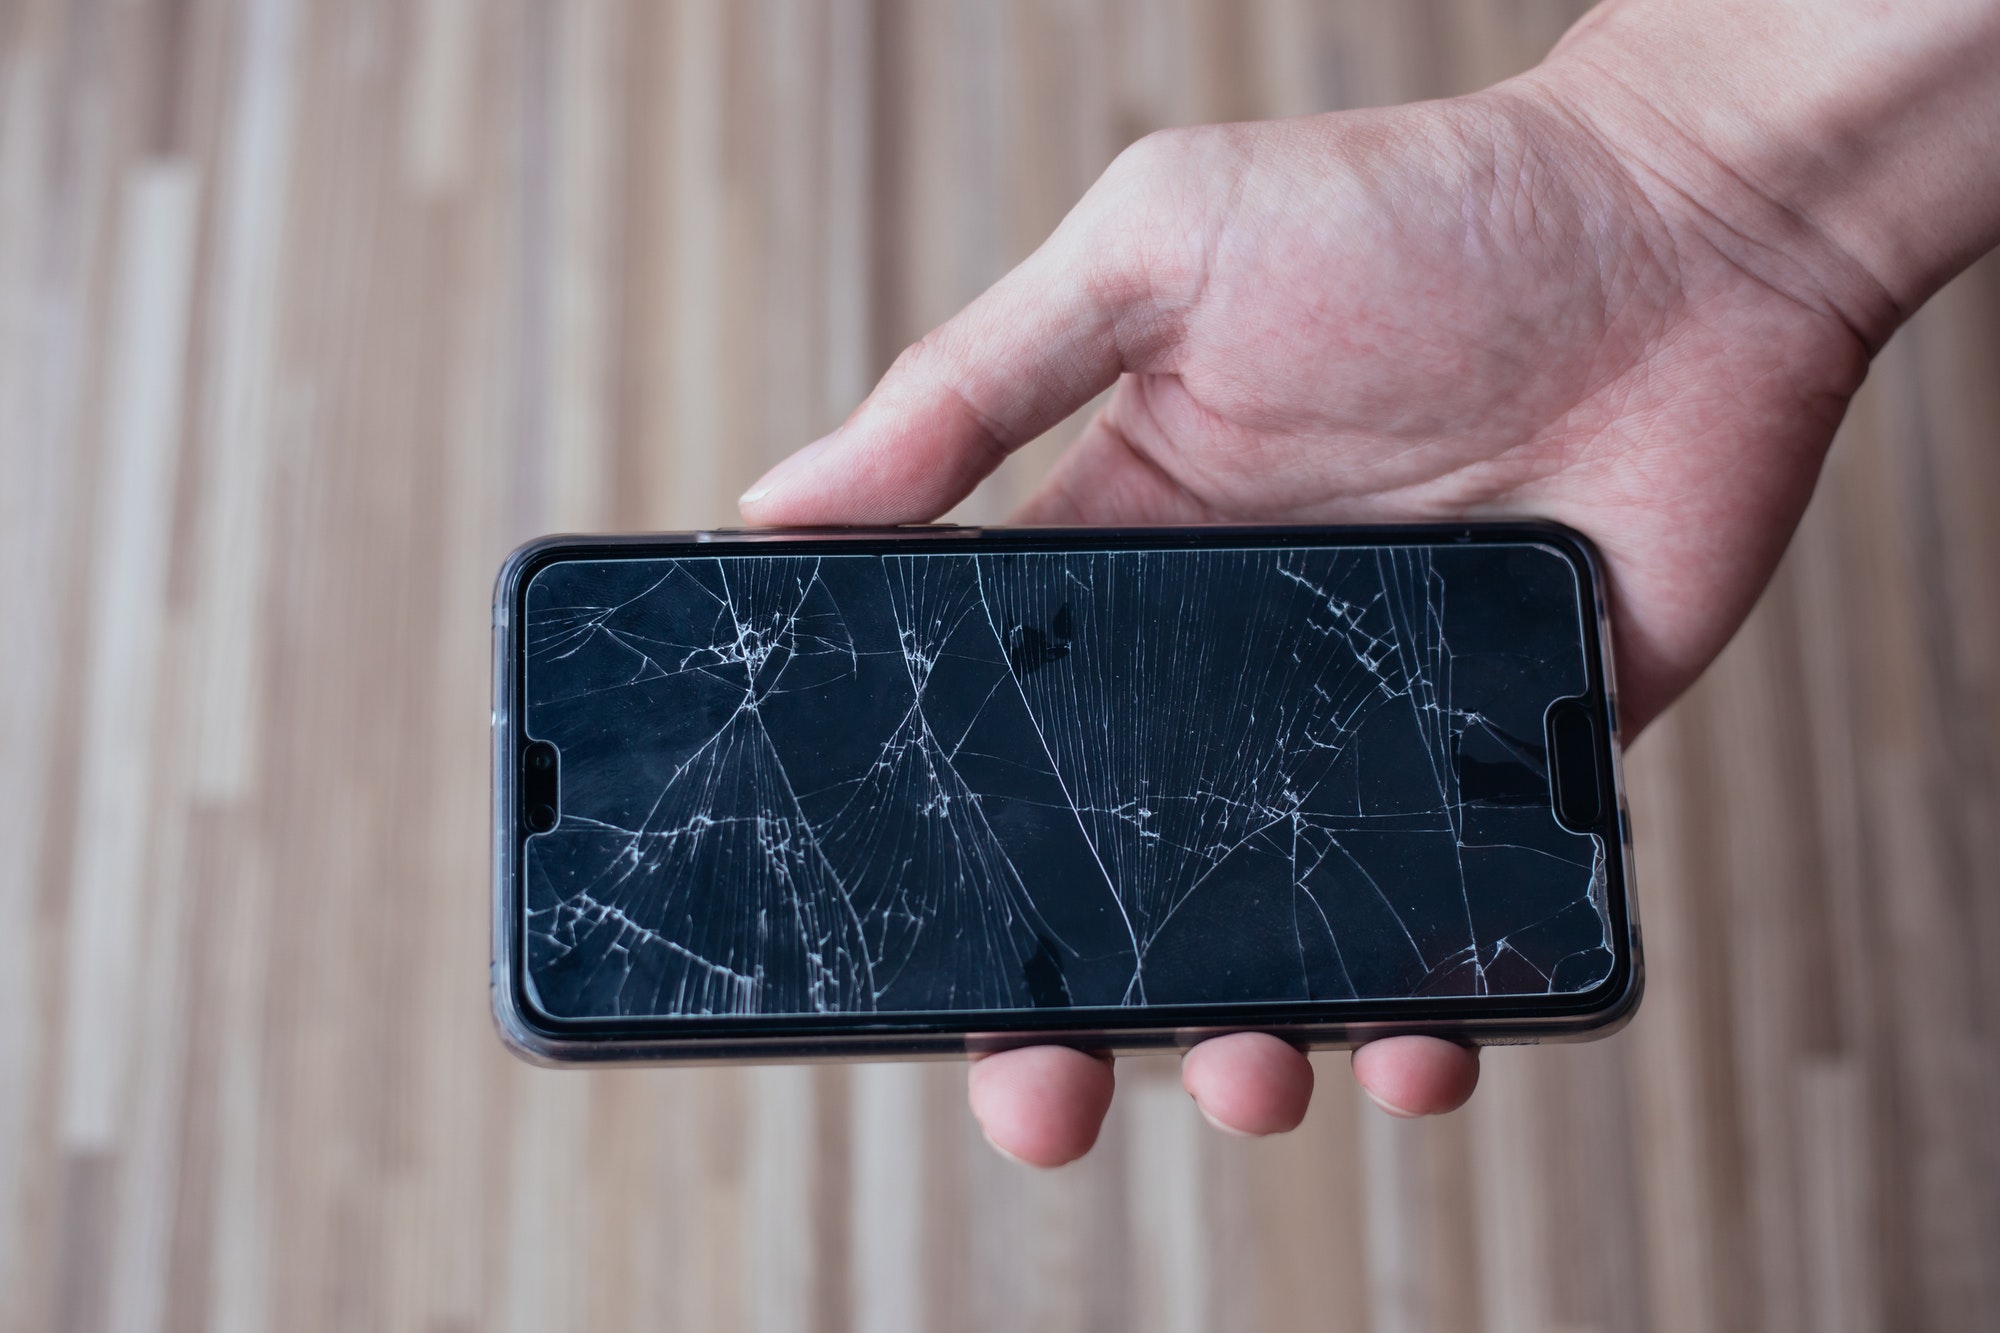 smartphone problems that can be fixed